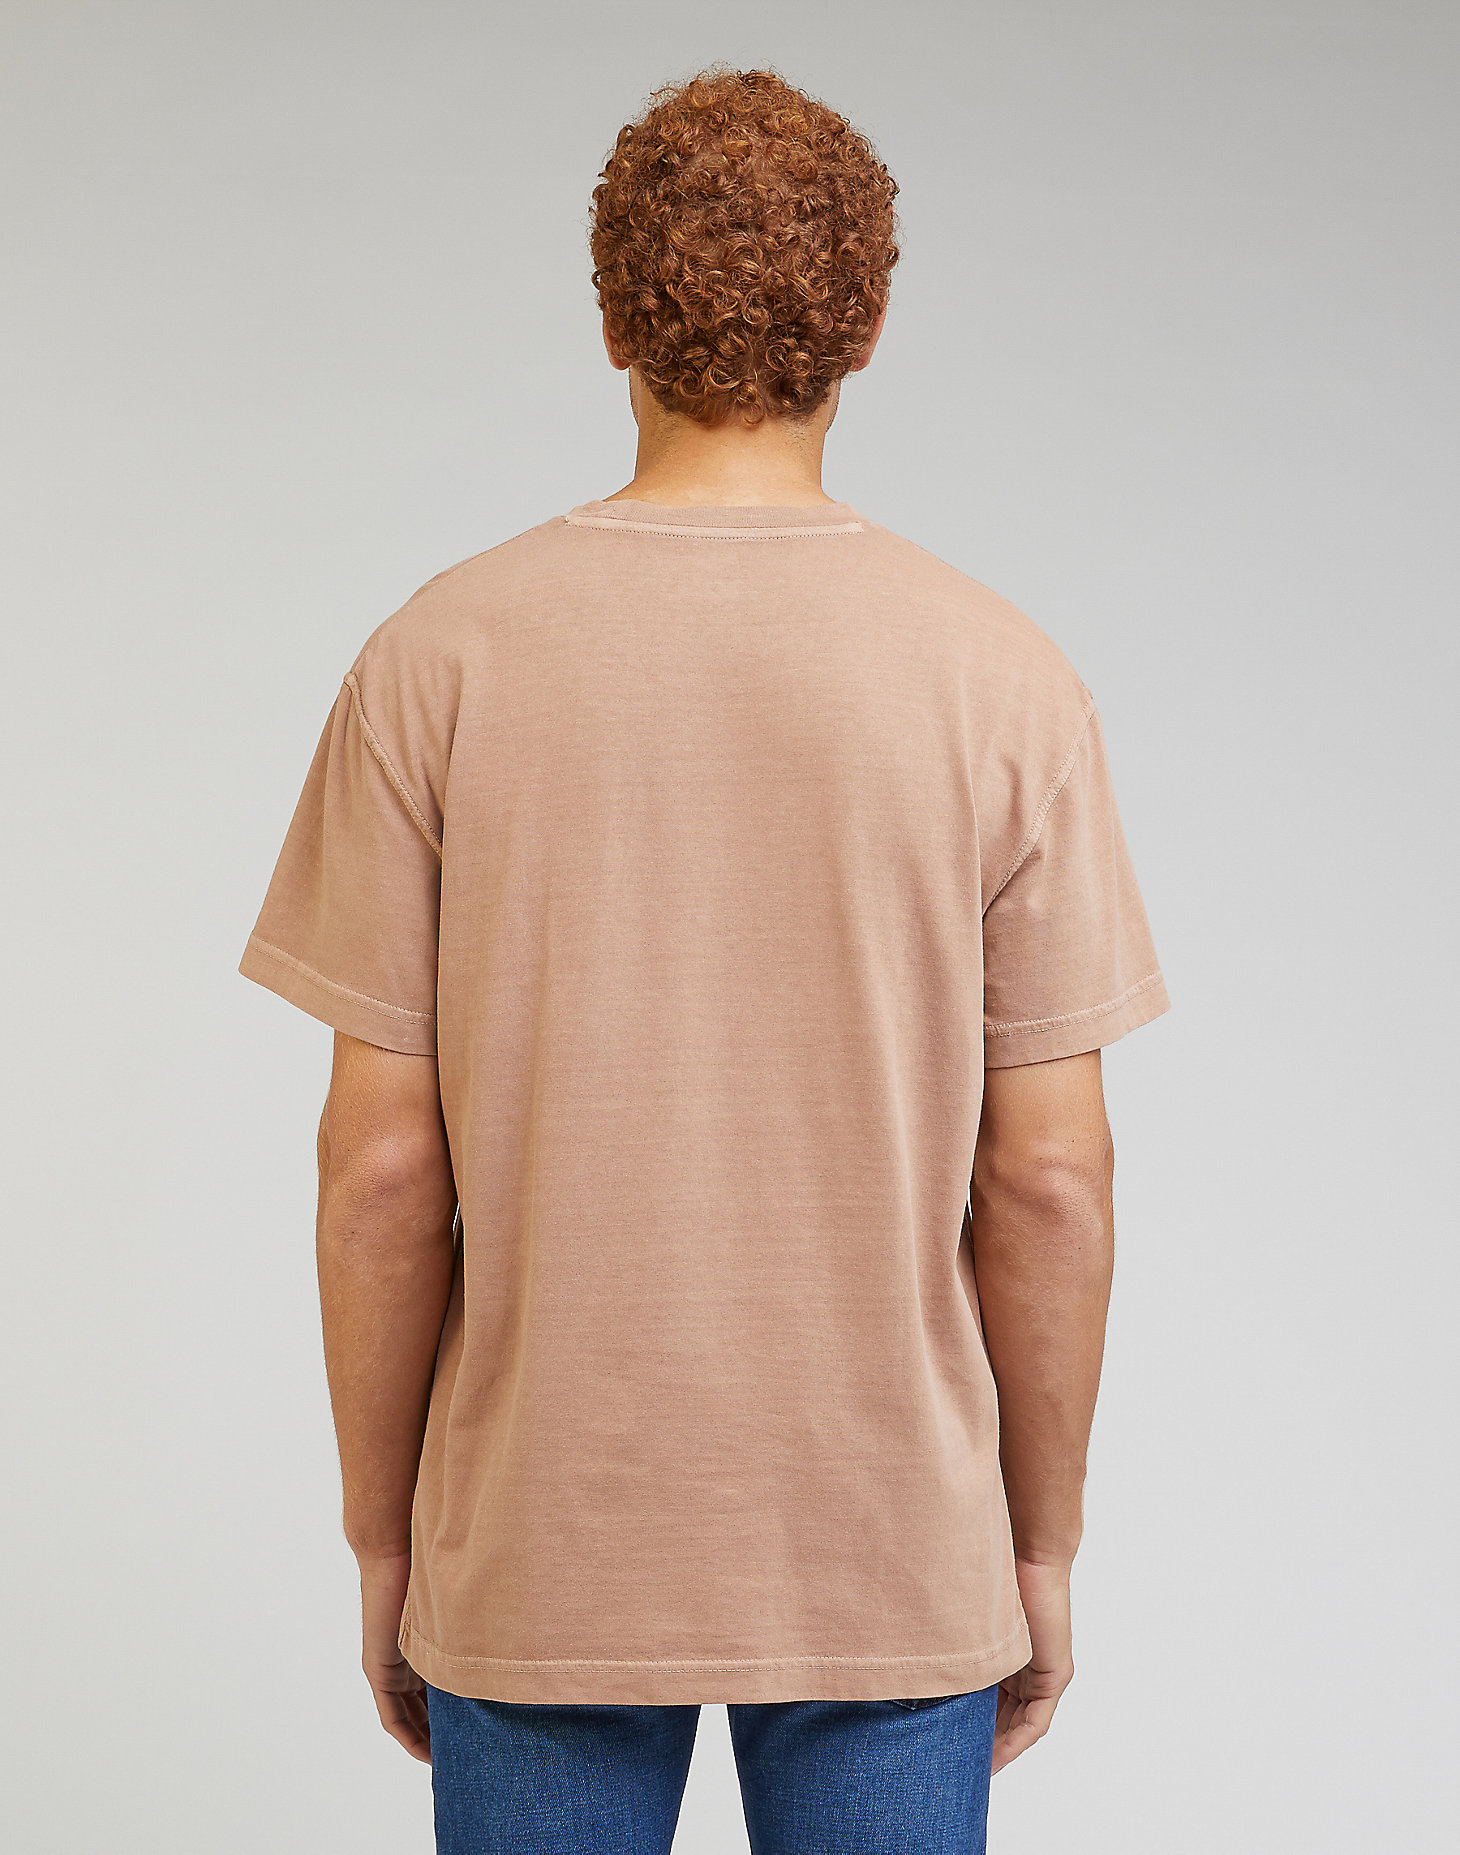 Relaxed Pocket Tee in Cider alternative view 1